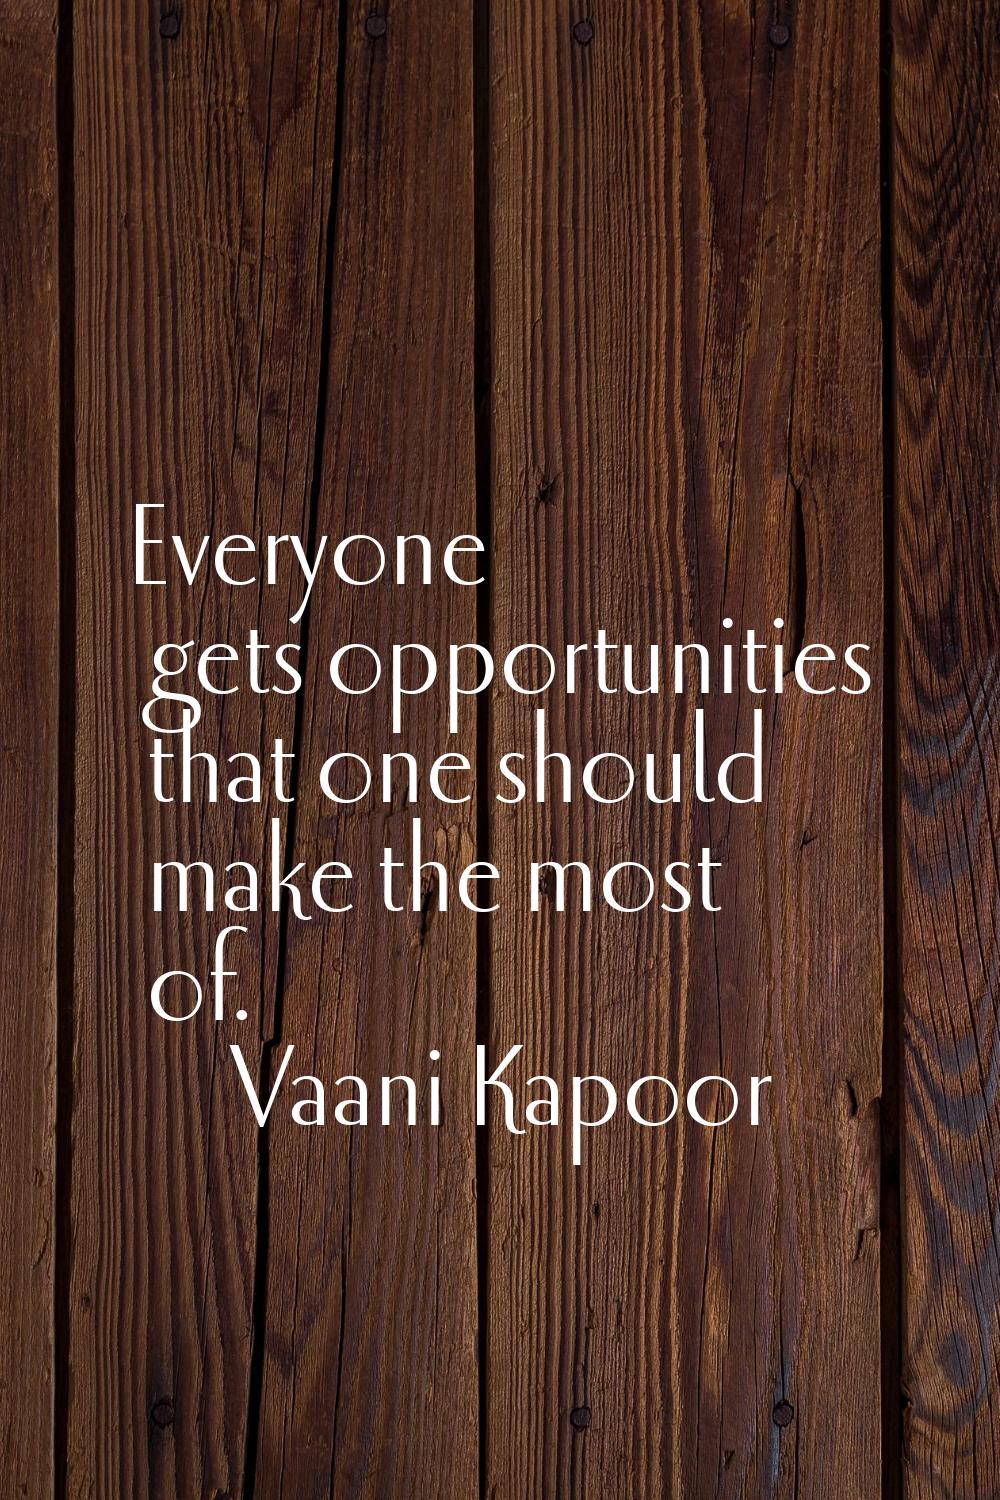 Everyone gets opportunities that one should make the most of.